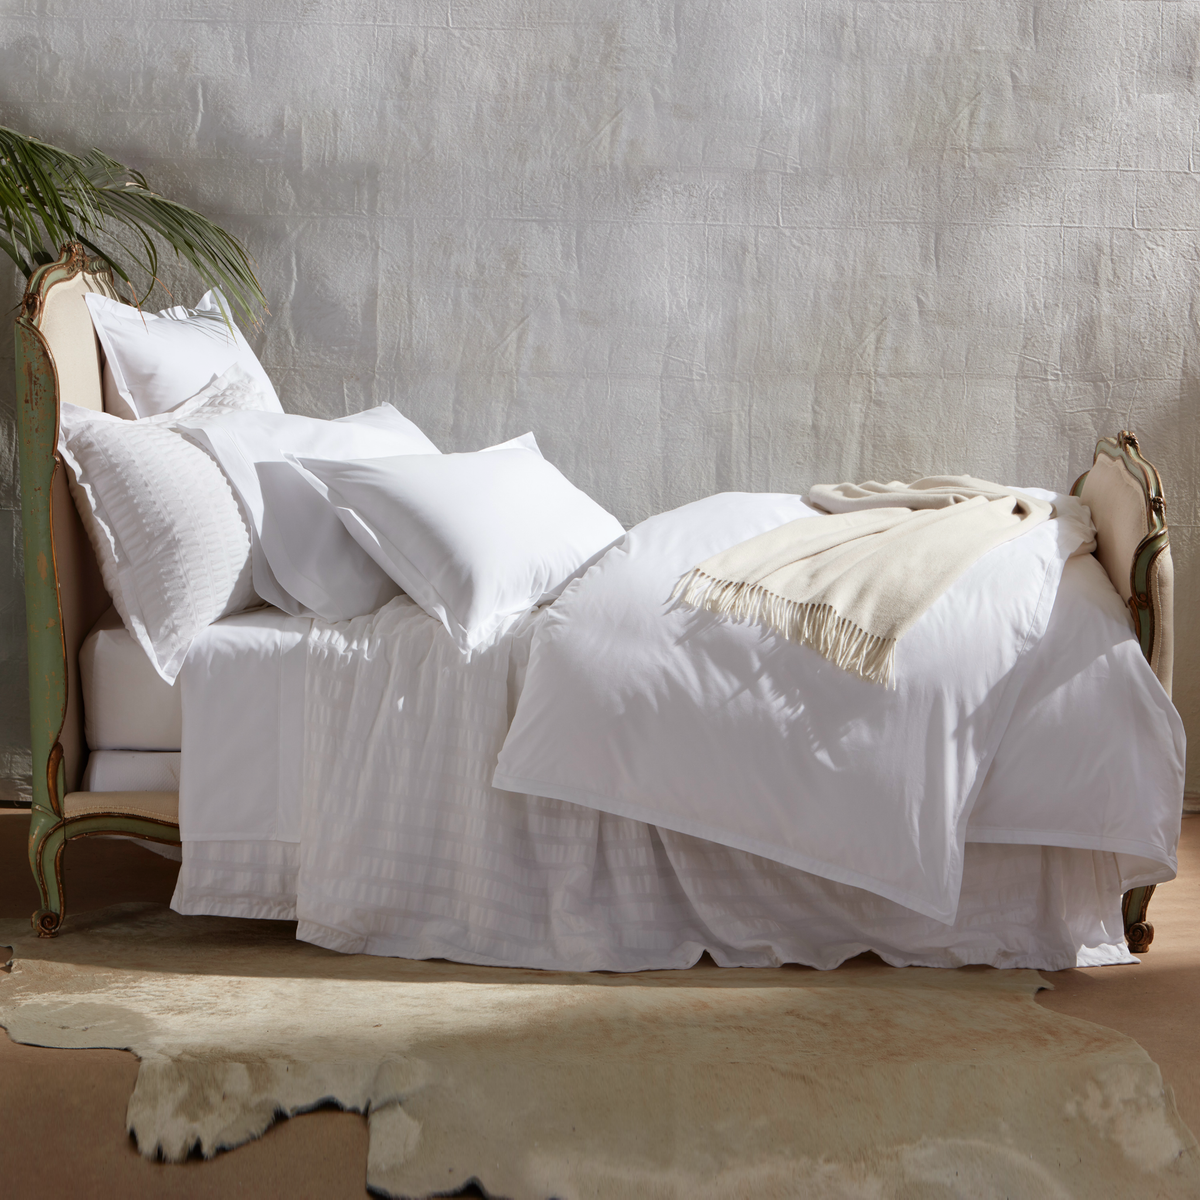 Matouk Panama Bedding Coordinated with Ceylon Satin and Paley in Bone Parchment Color